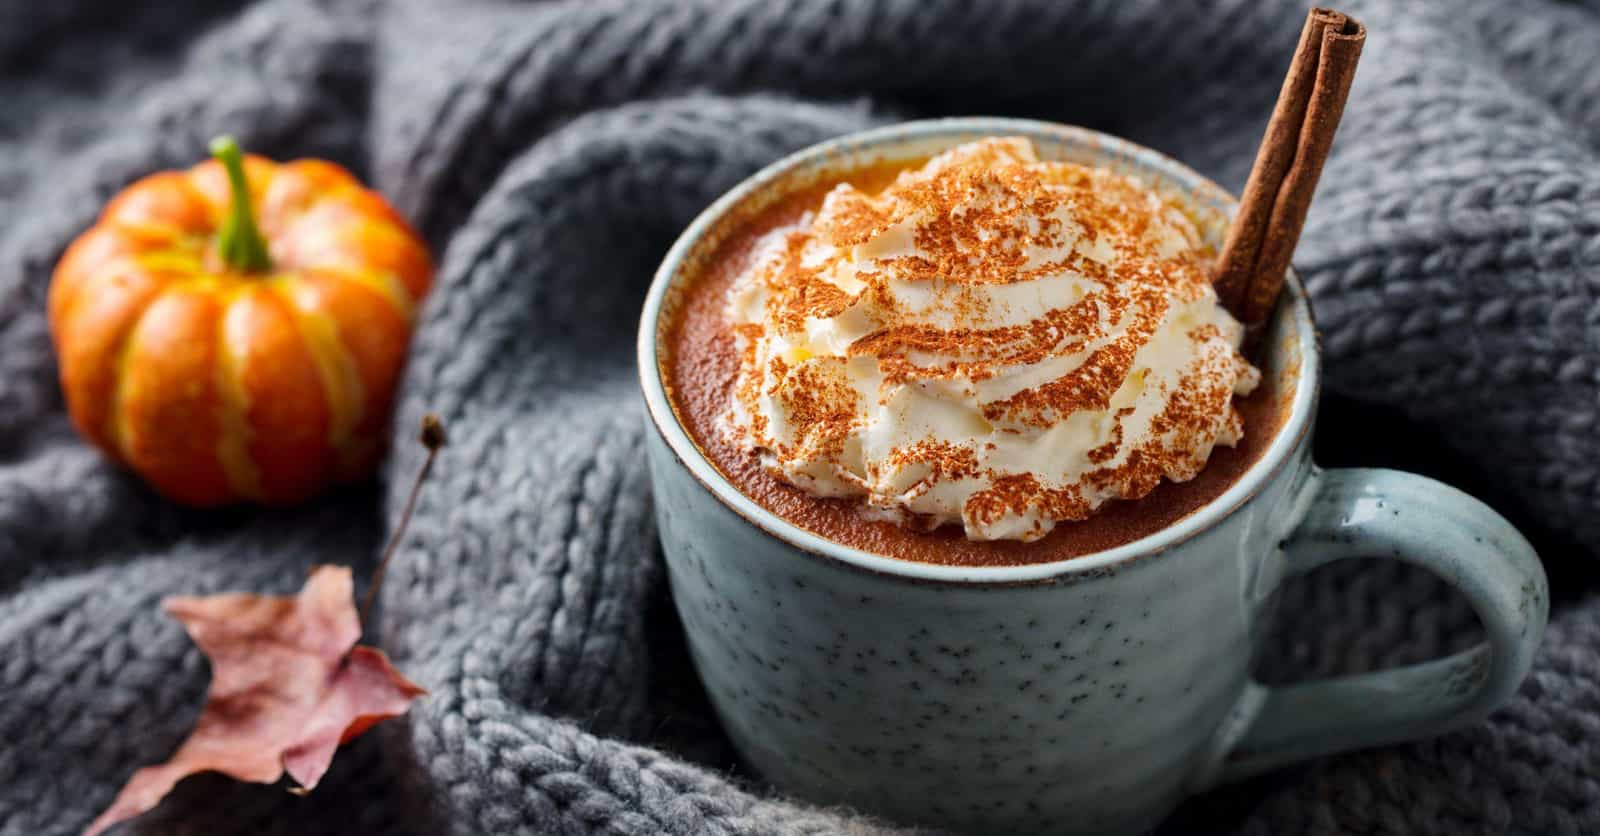 What Are The Historical Origins Of The 'Pumpkin-Spiced Everything' Craze?